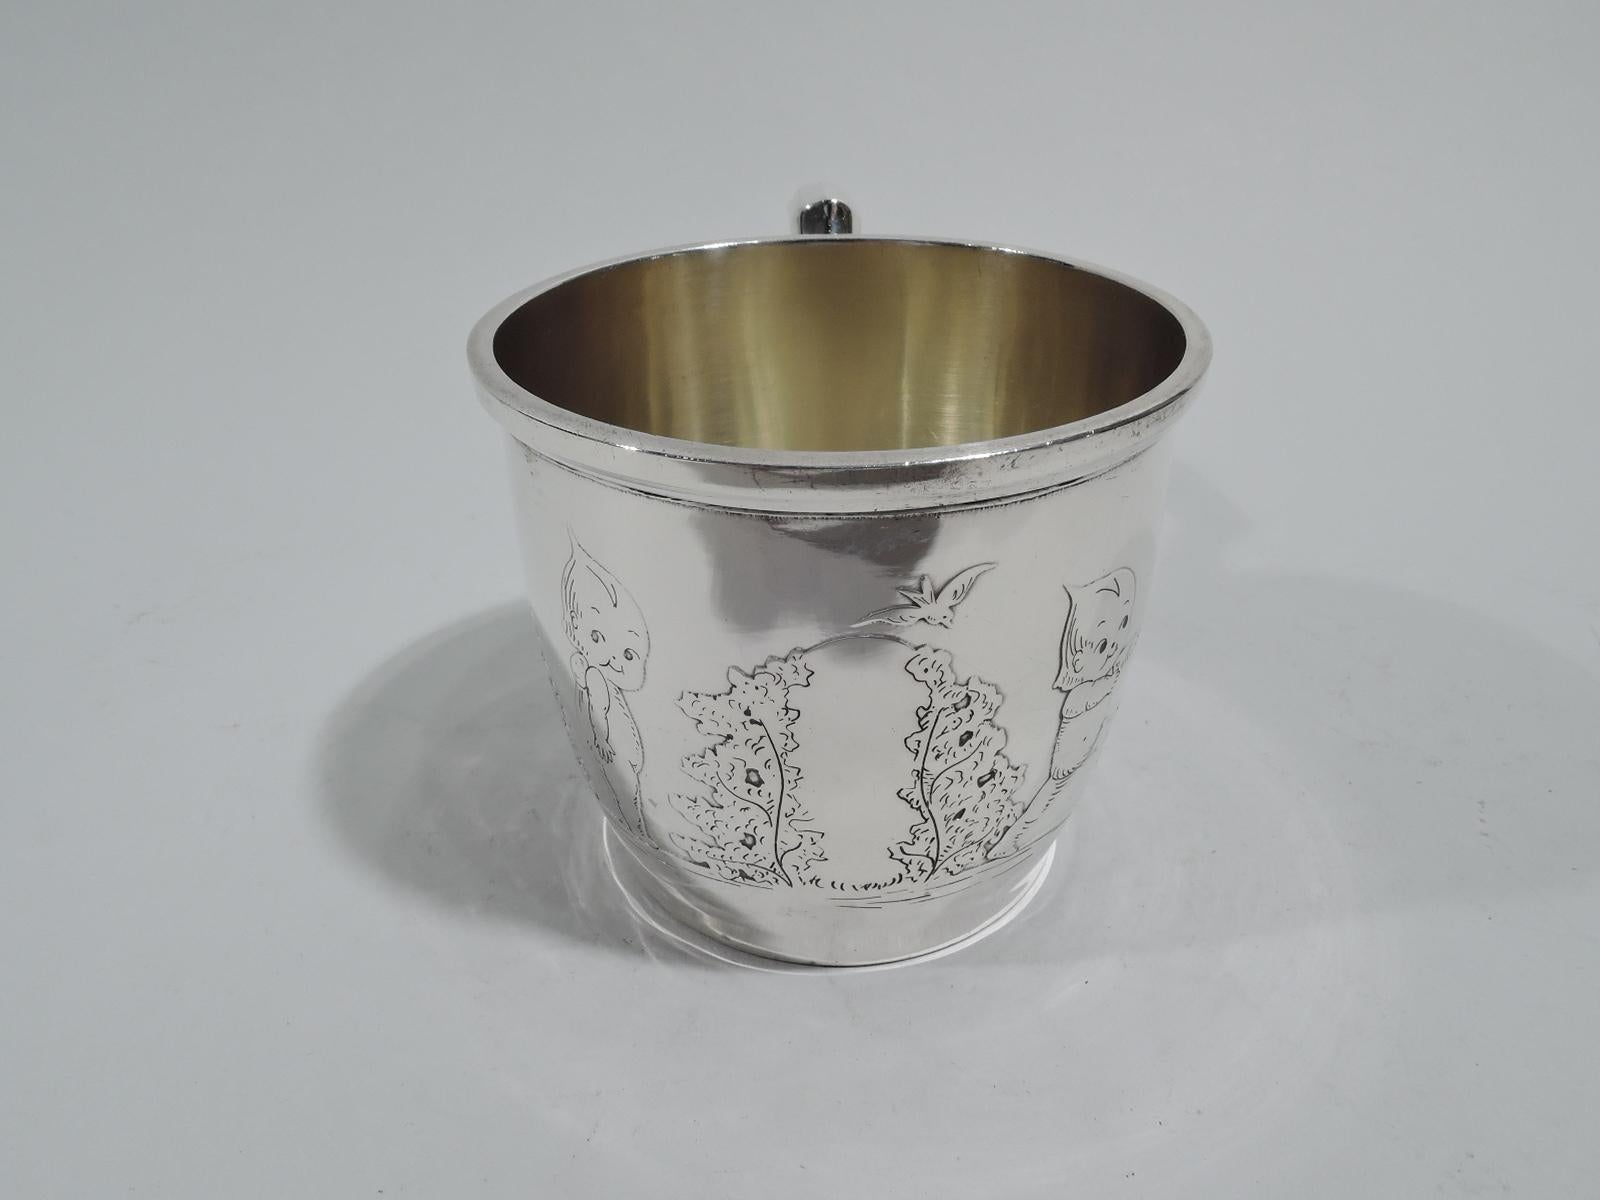 Art Deco sterling silver baby cup, circa 1920. Gently curved and tapering sides with scroll bracket handle. Acid-etched frieze with stubby-legged toddlers exploring the shrubbery. Arbor has vacant center for engraving. Interior gilt washed. Fully